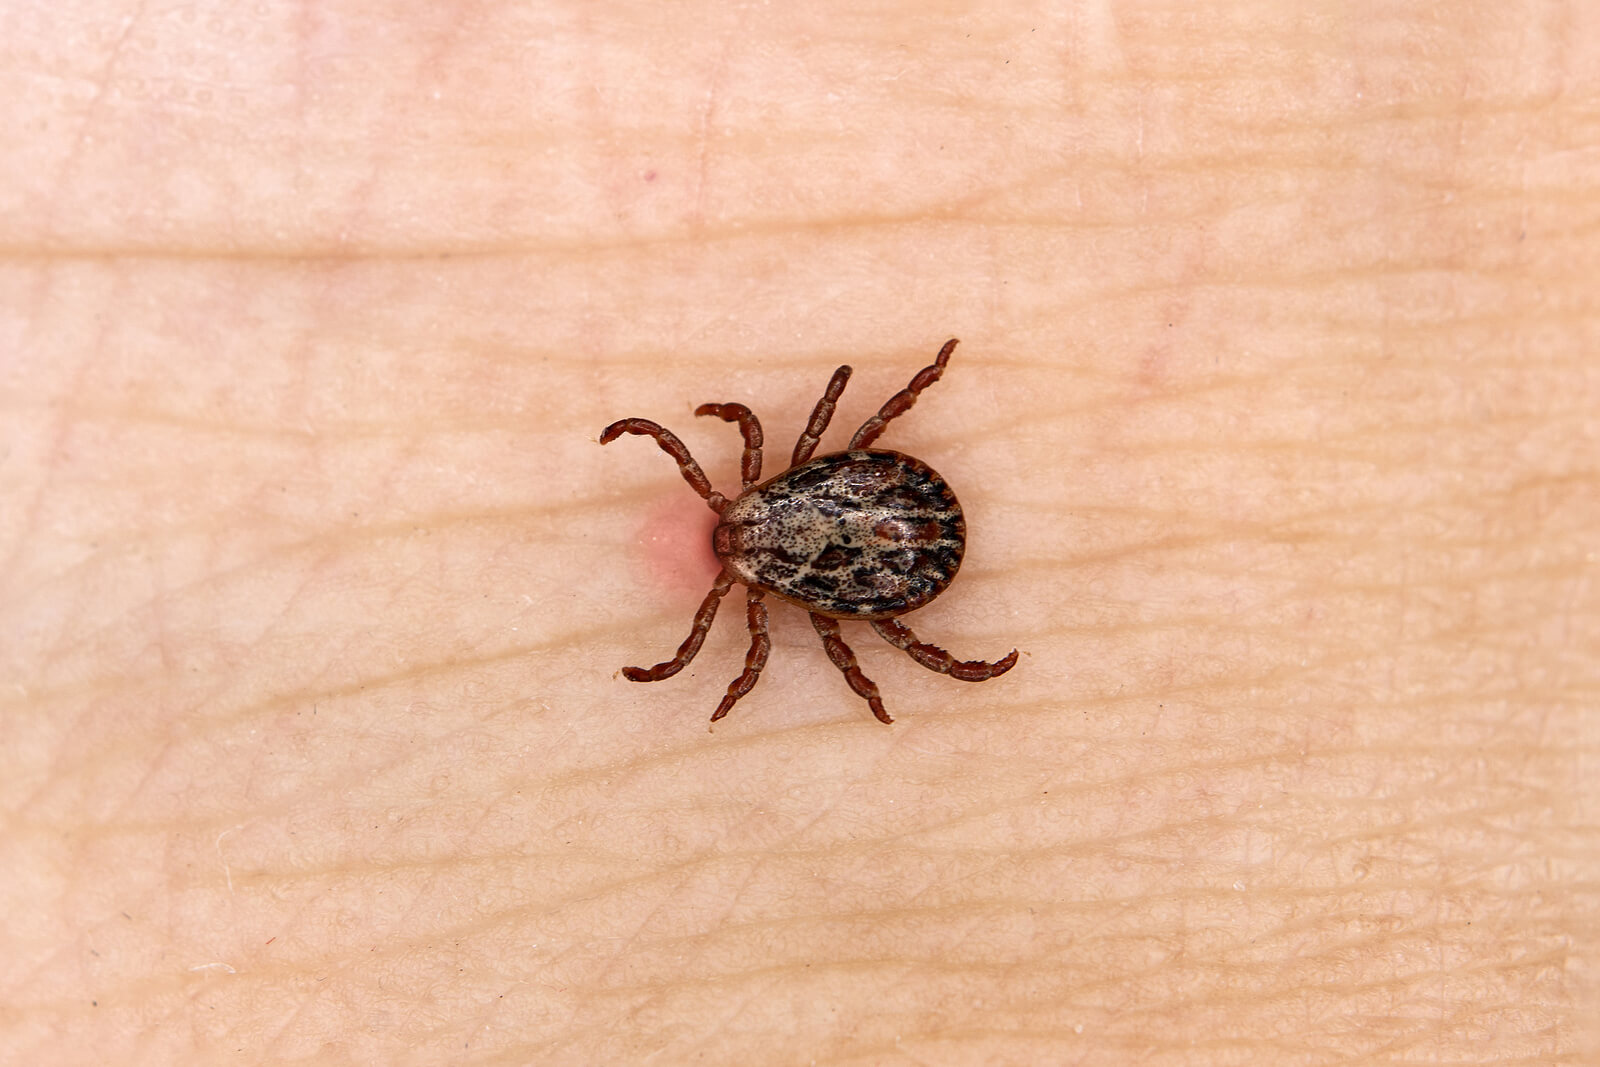 Causes and risk factors for Lyme disease include an insect bite